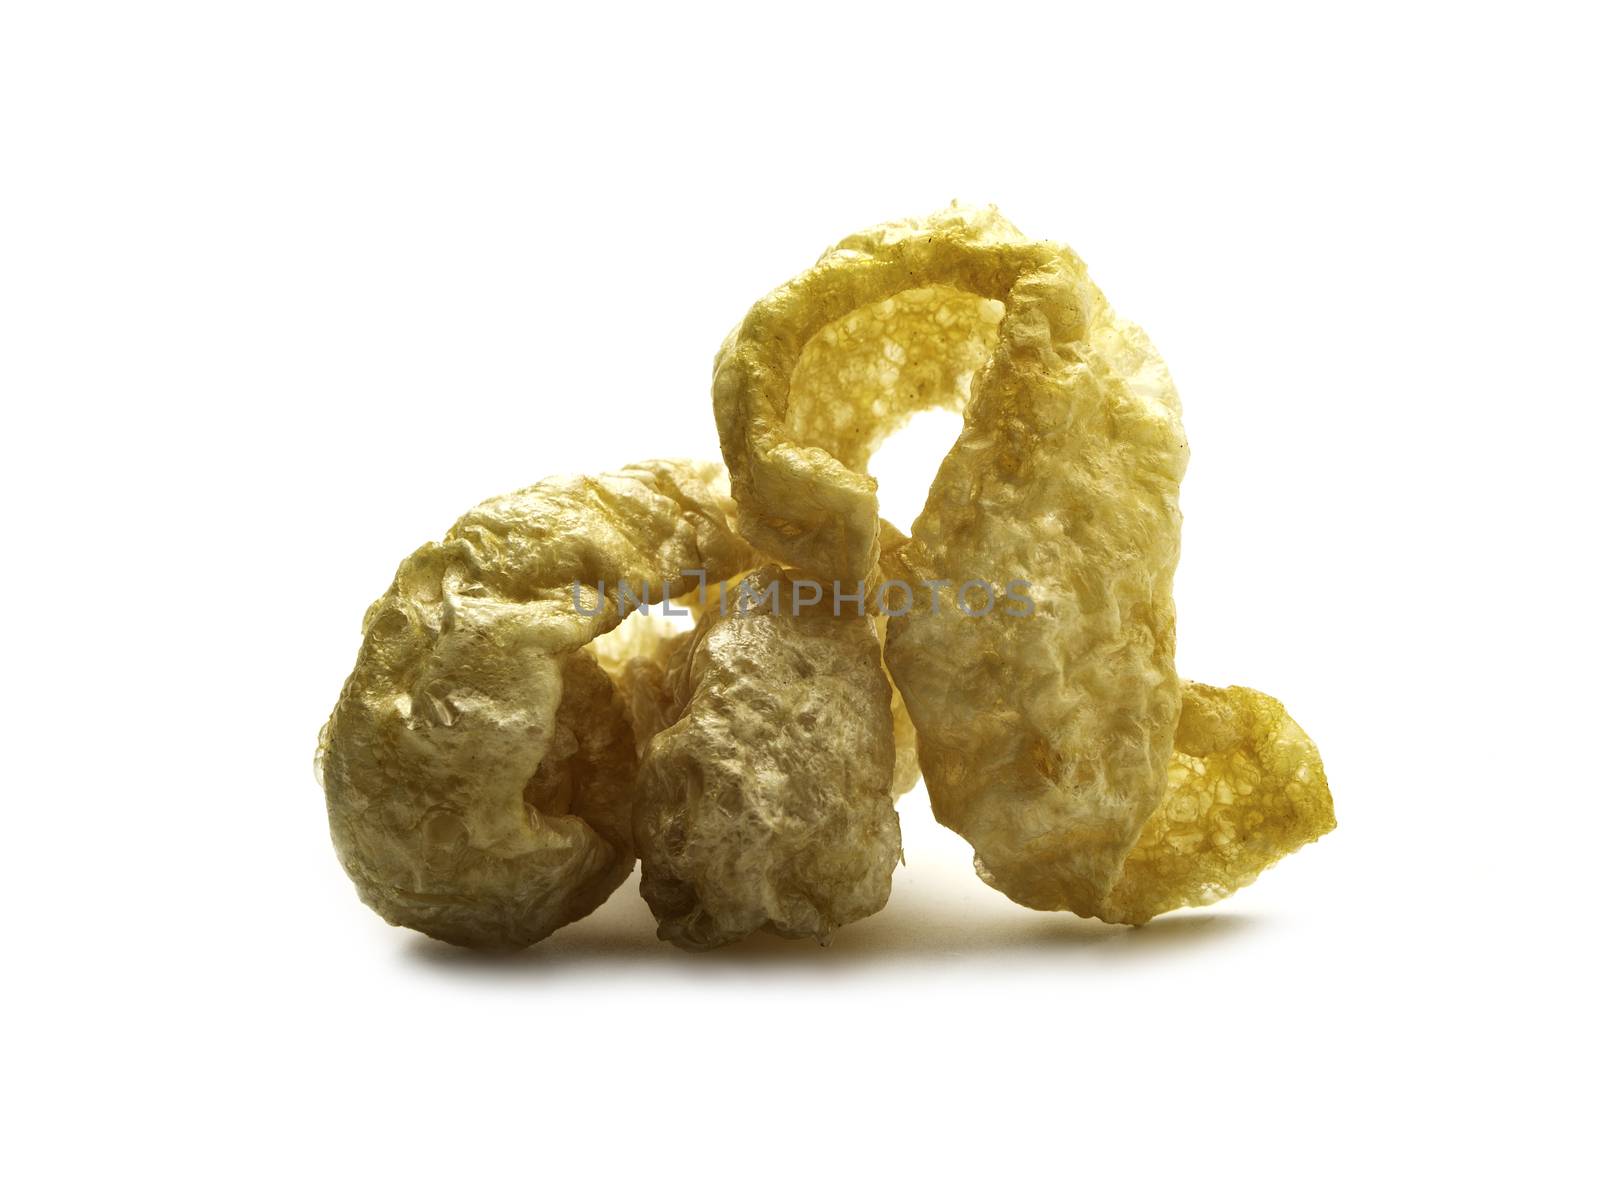 Pork snack crispy and blistered isolated on white background. Crispy pork skin pieces. Food concept.